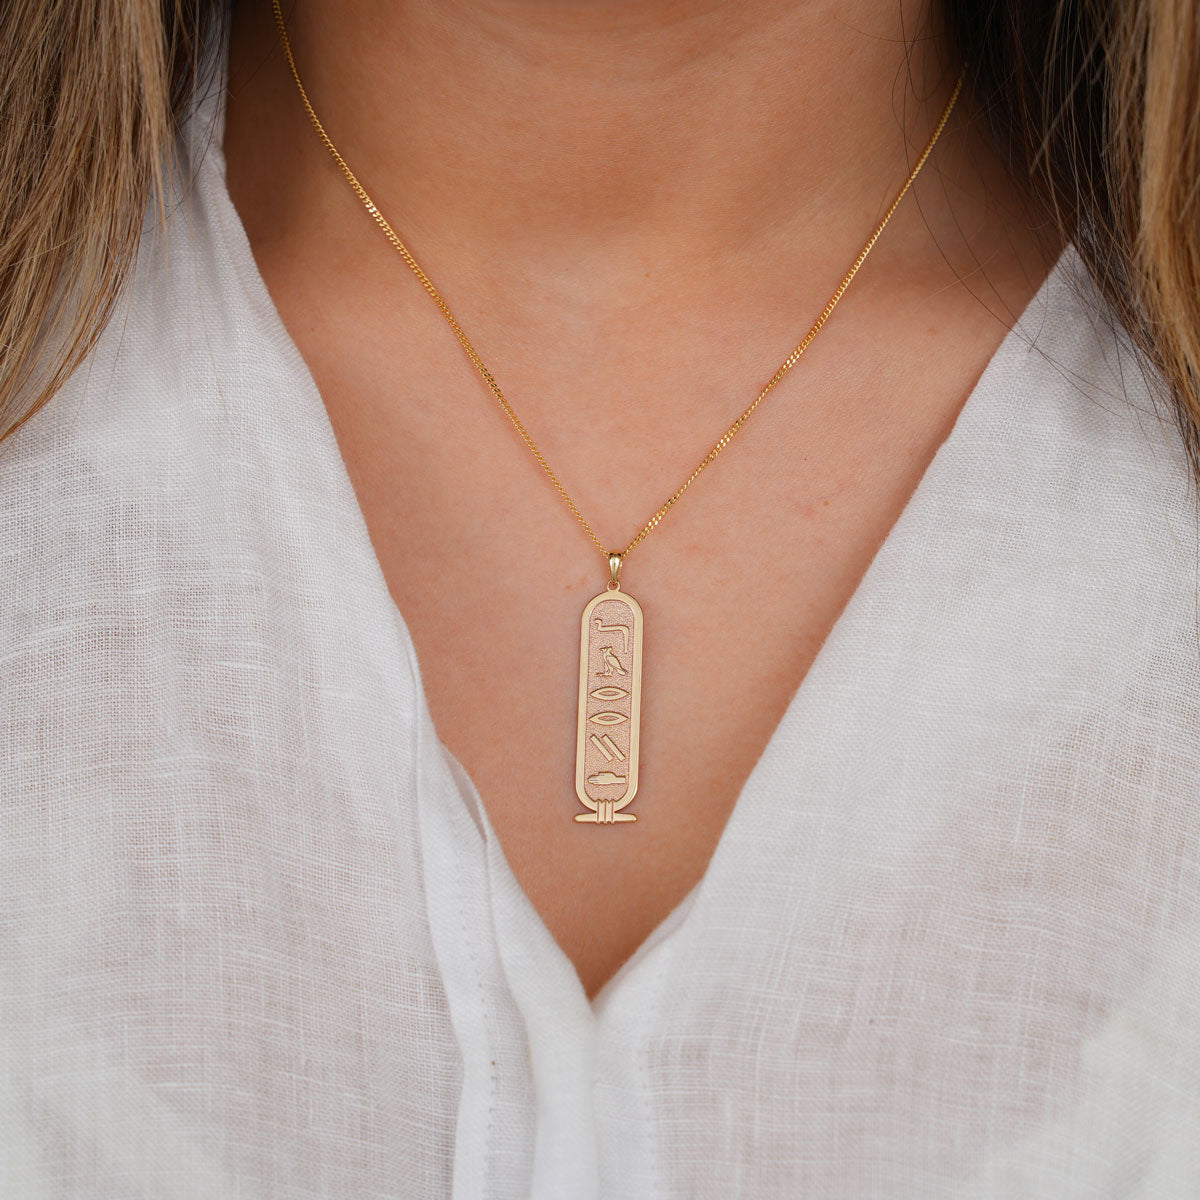 Personalized Cartouche Egyptian Hieroglyph Name Necklace